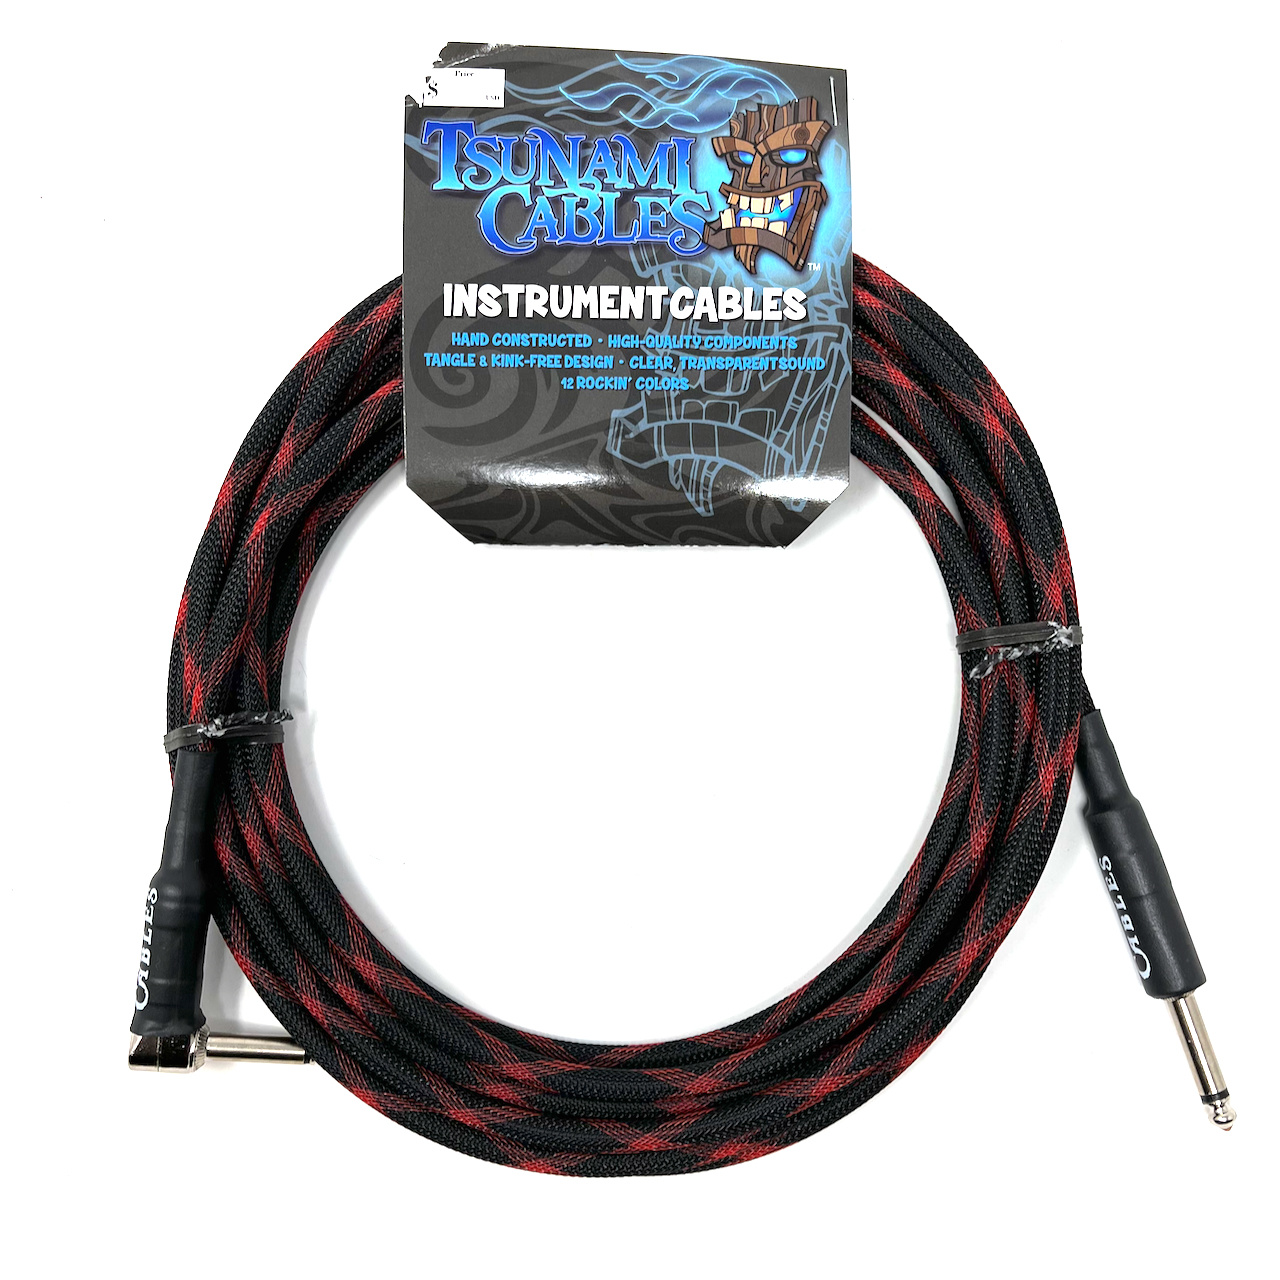 Tsunami Cables 15' Handcrafted Premium Instrument Cable, 1/4" Straight-Right Angle, "Black Widow" (black/red)